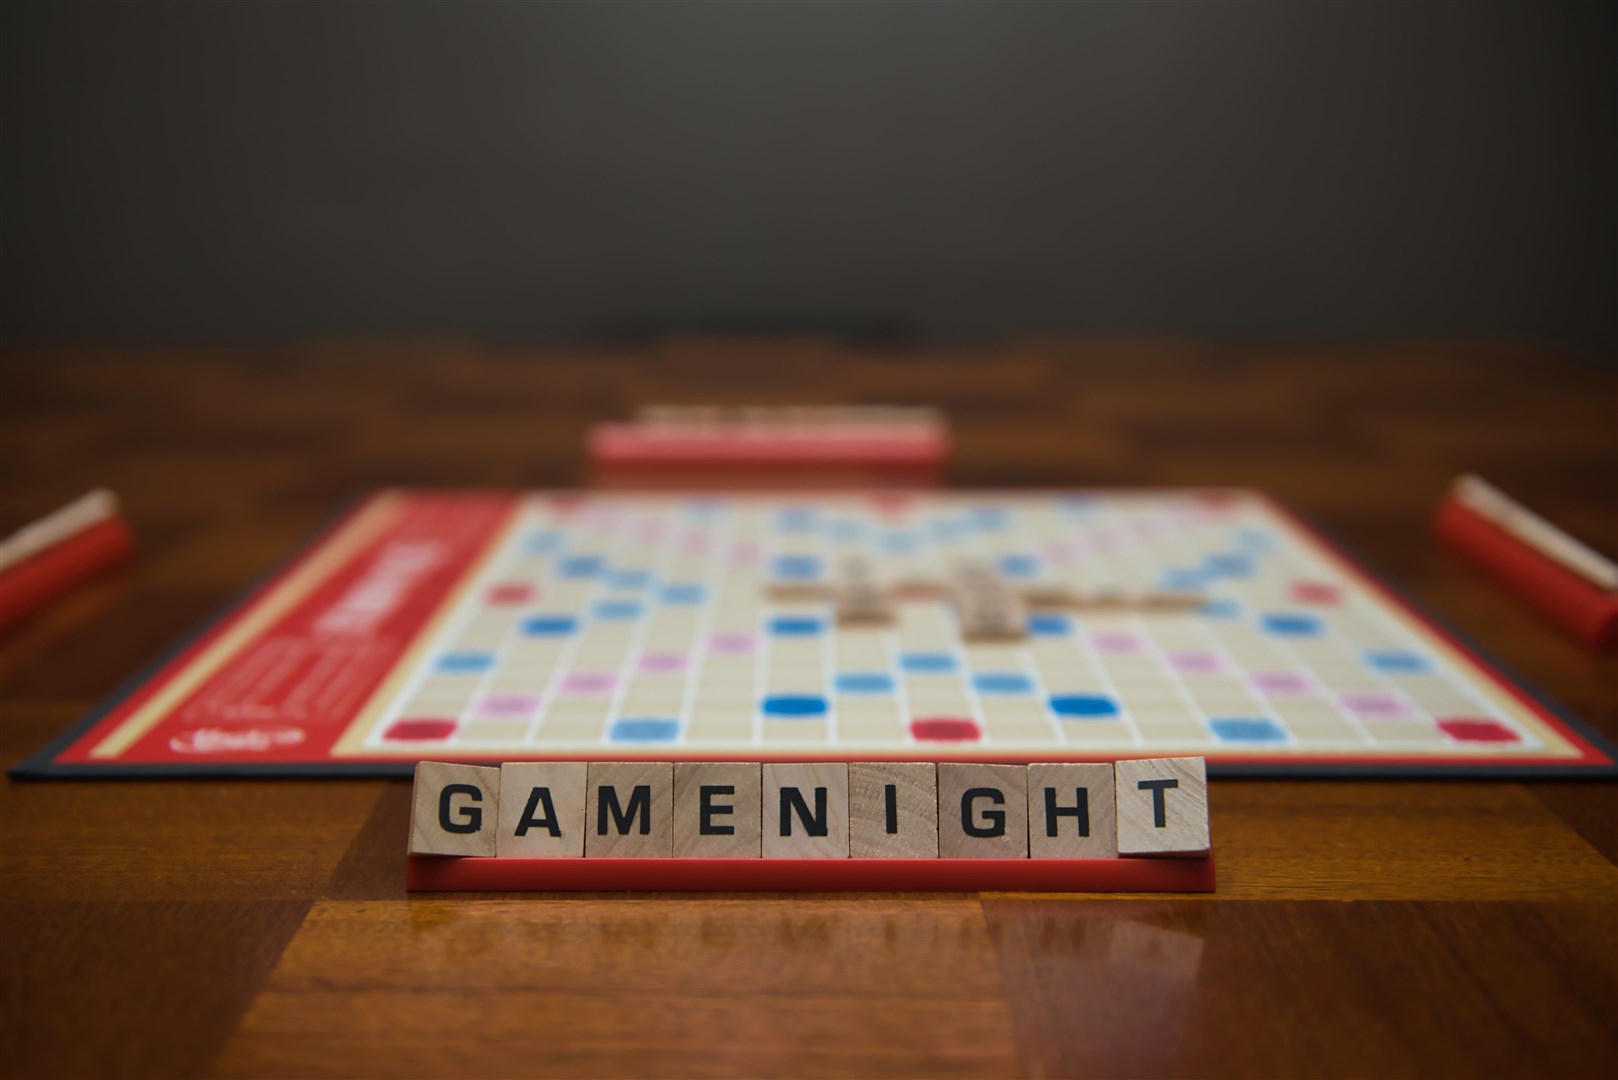 What board game would you choose to play?